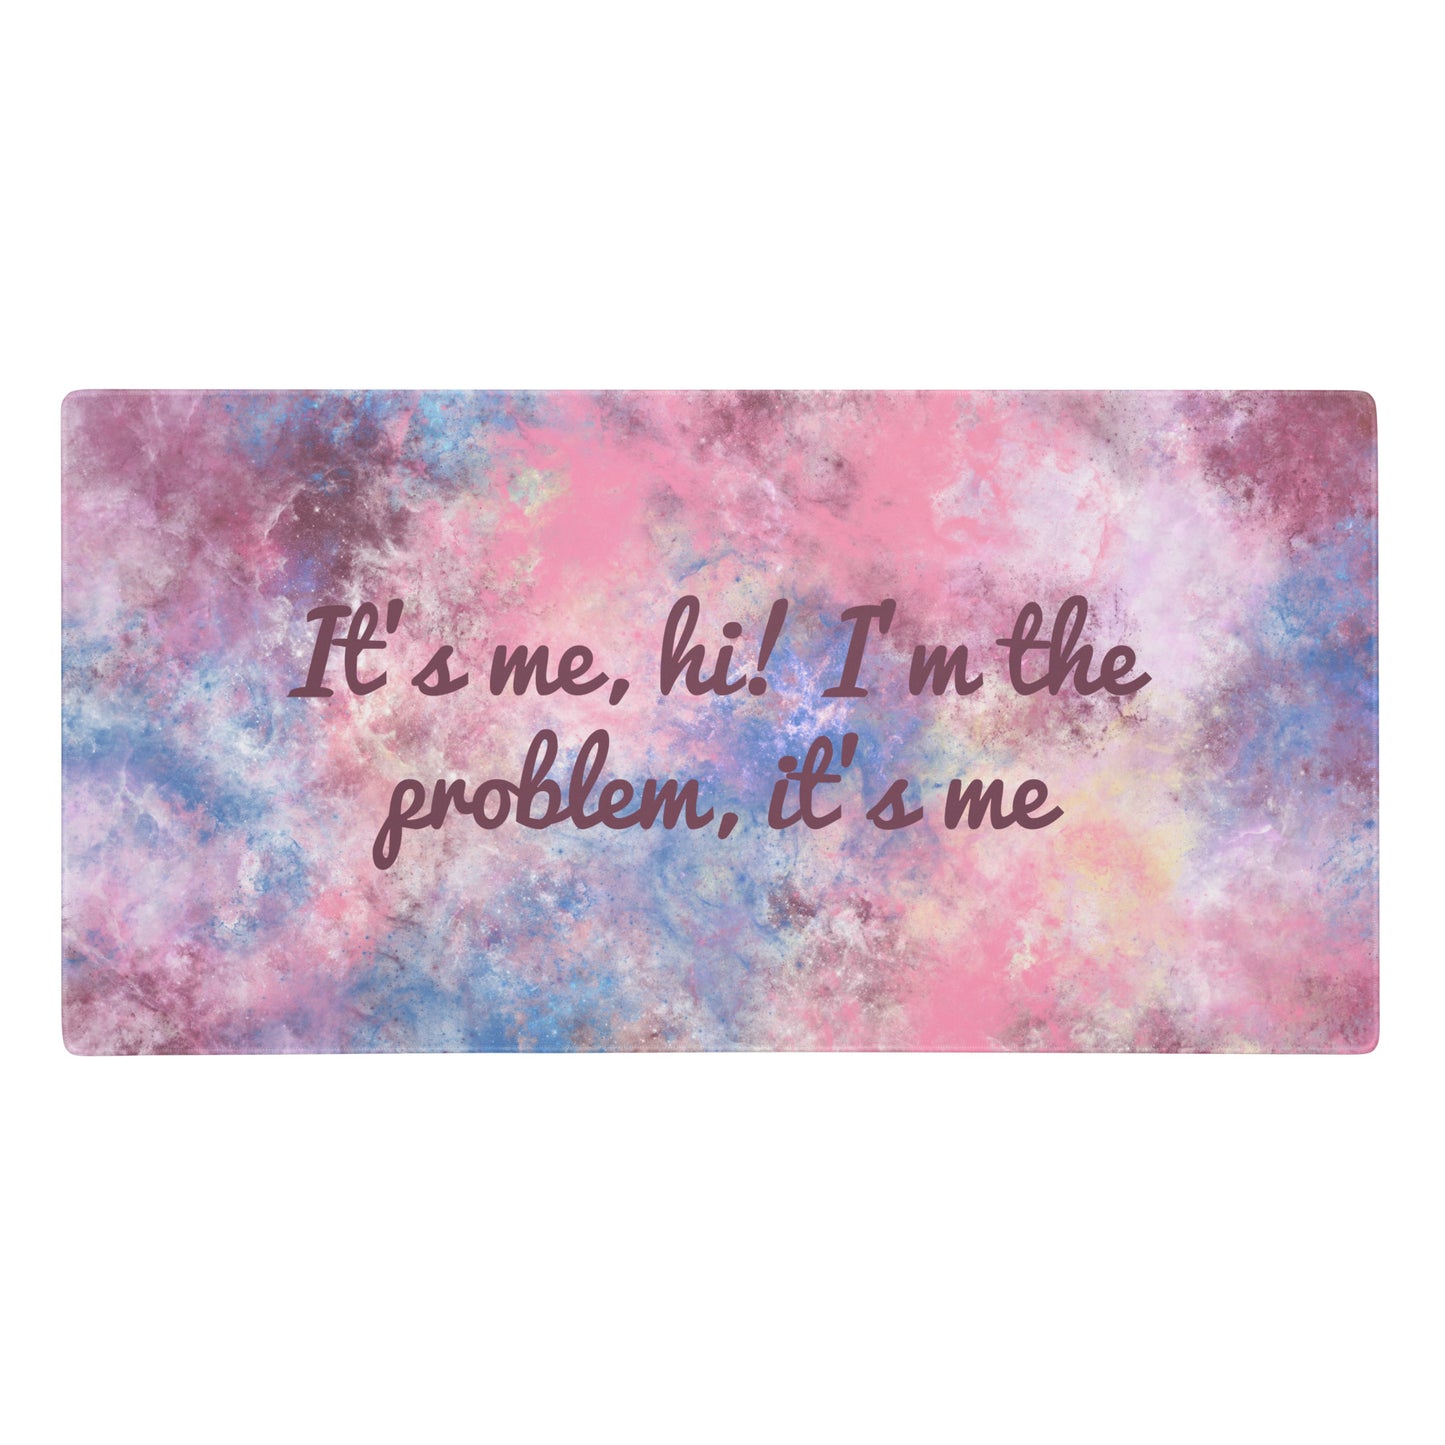 A pink, blue, and white gaming desk pad with the quote It's me, hi! I'm the problem, it's me.